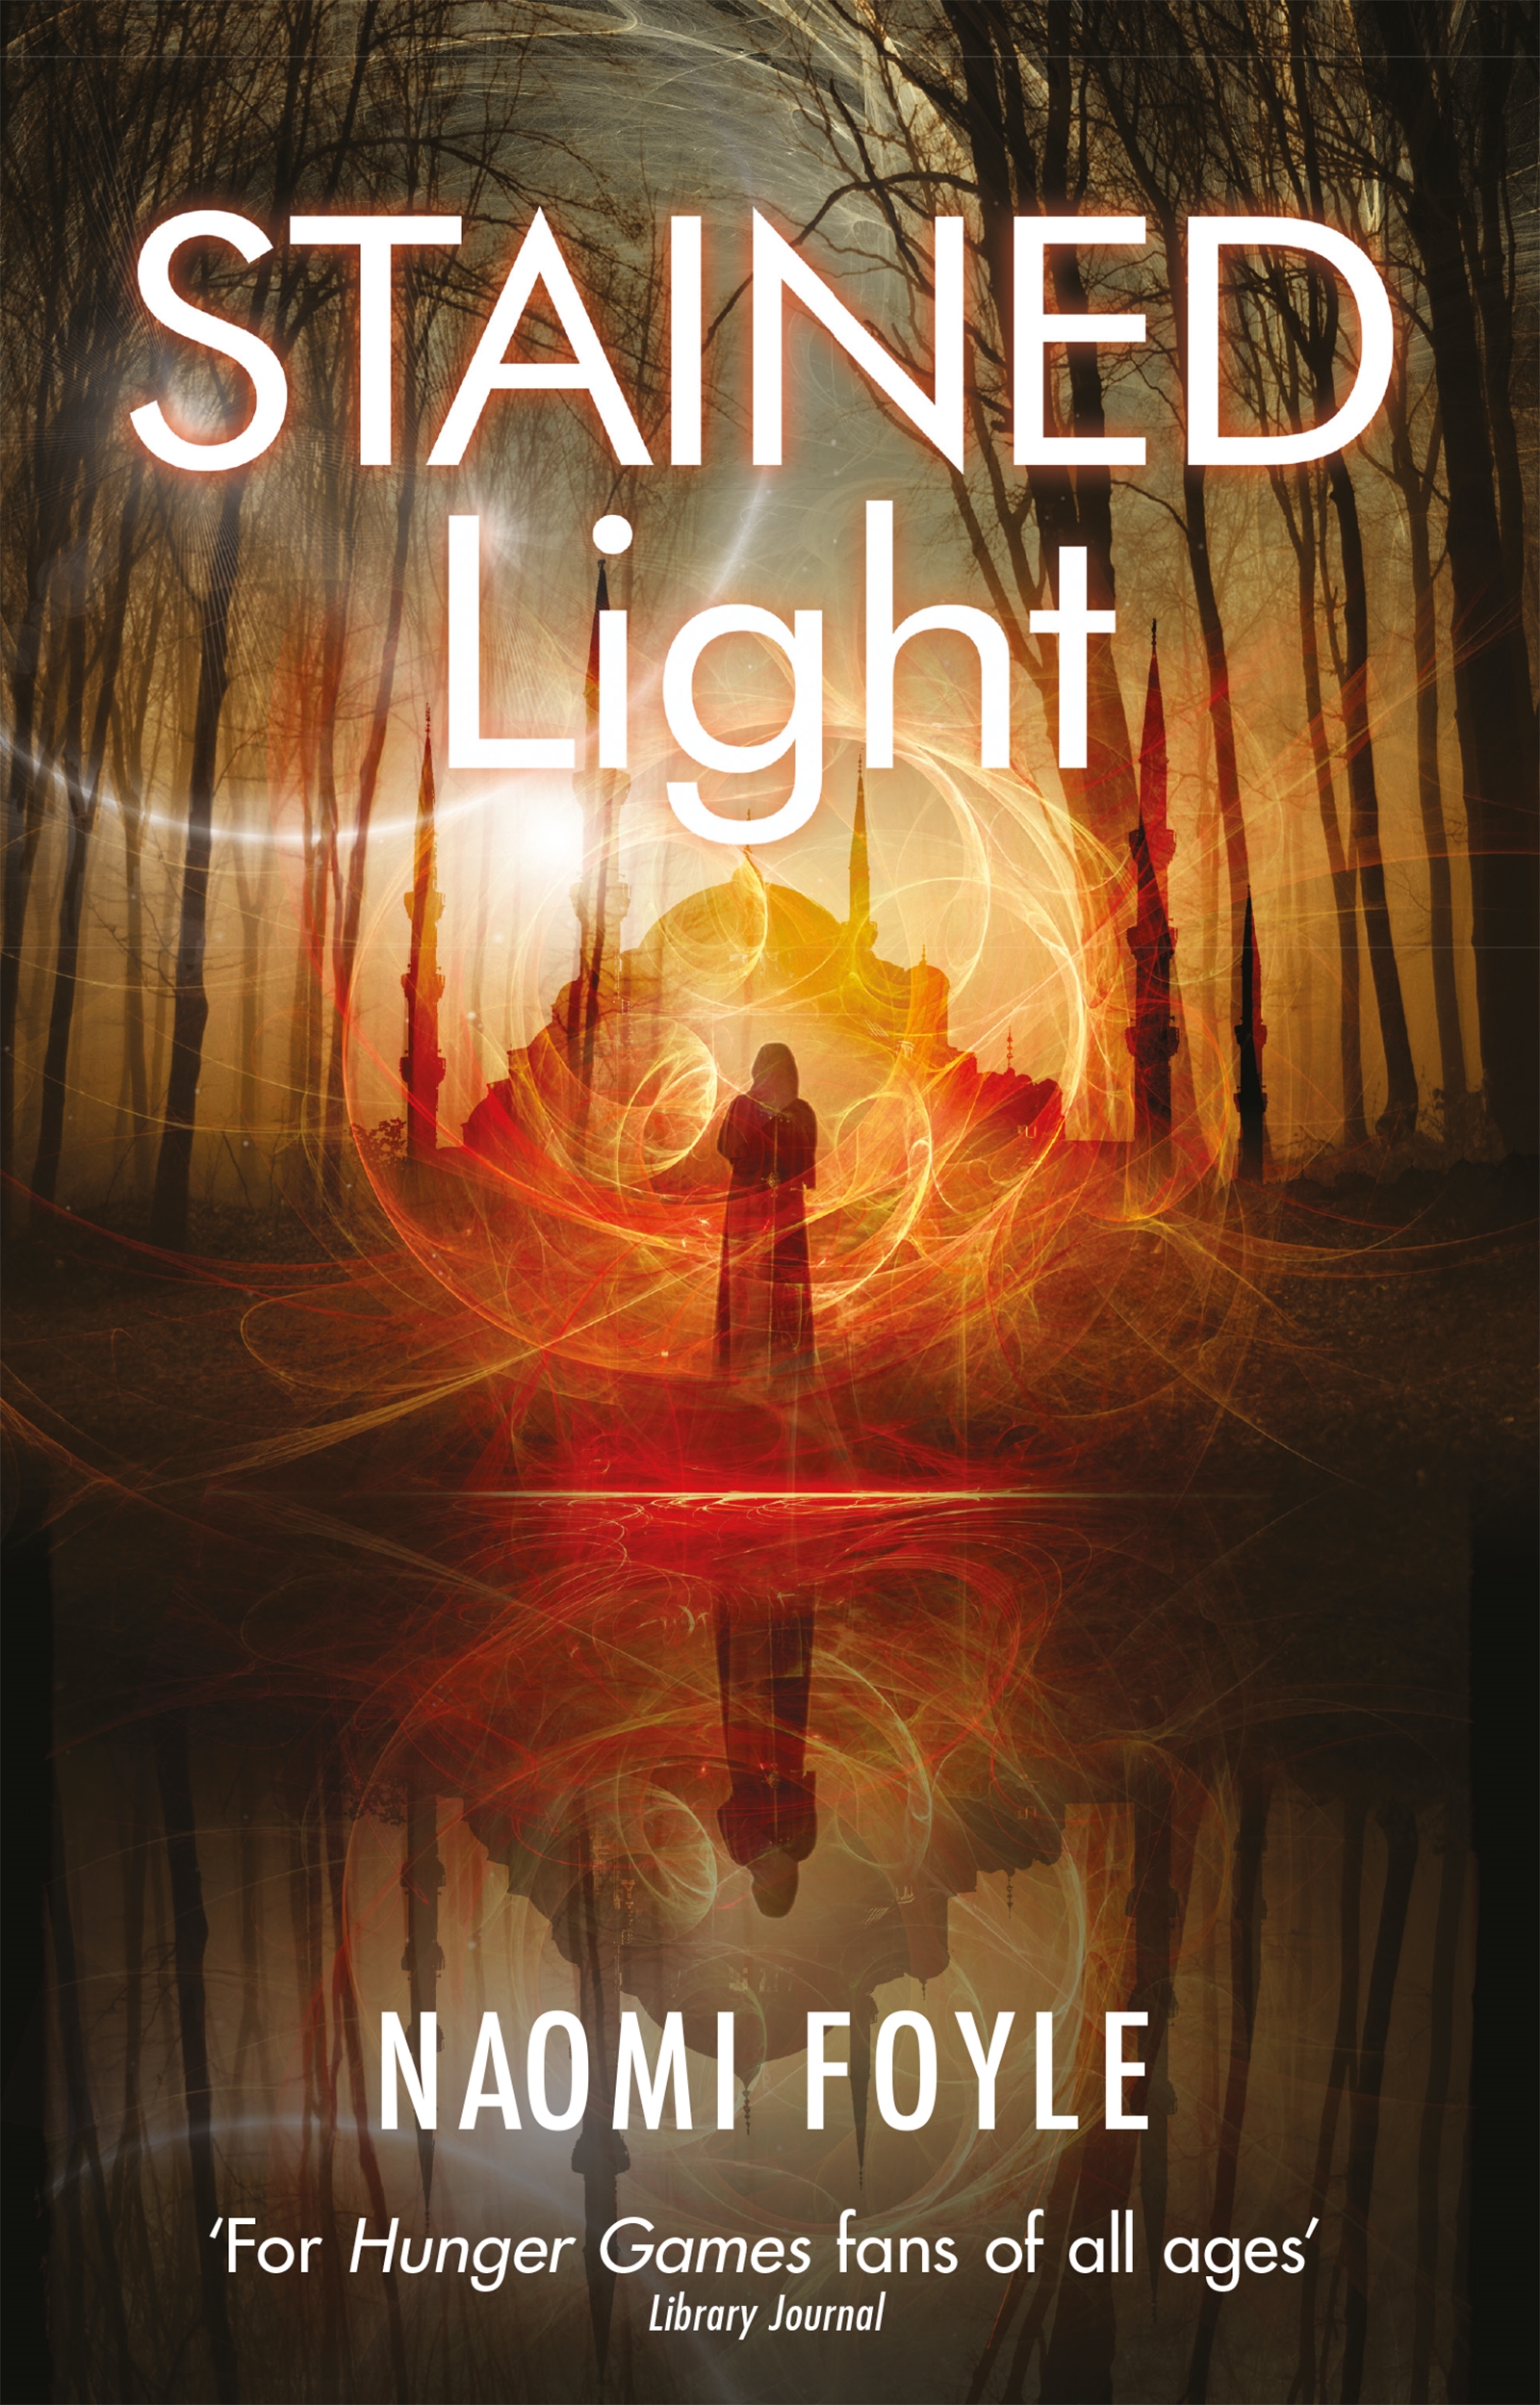 The cover of Stained Light: The Gaia Chronicles Book 4. And image of a robed woman, framed by trees, standing in front of the silhouette of a large mosque or temple.- ©Jo Fletcher Books/Andy Vella